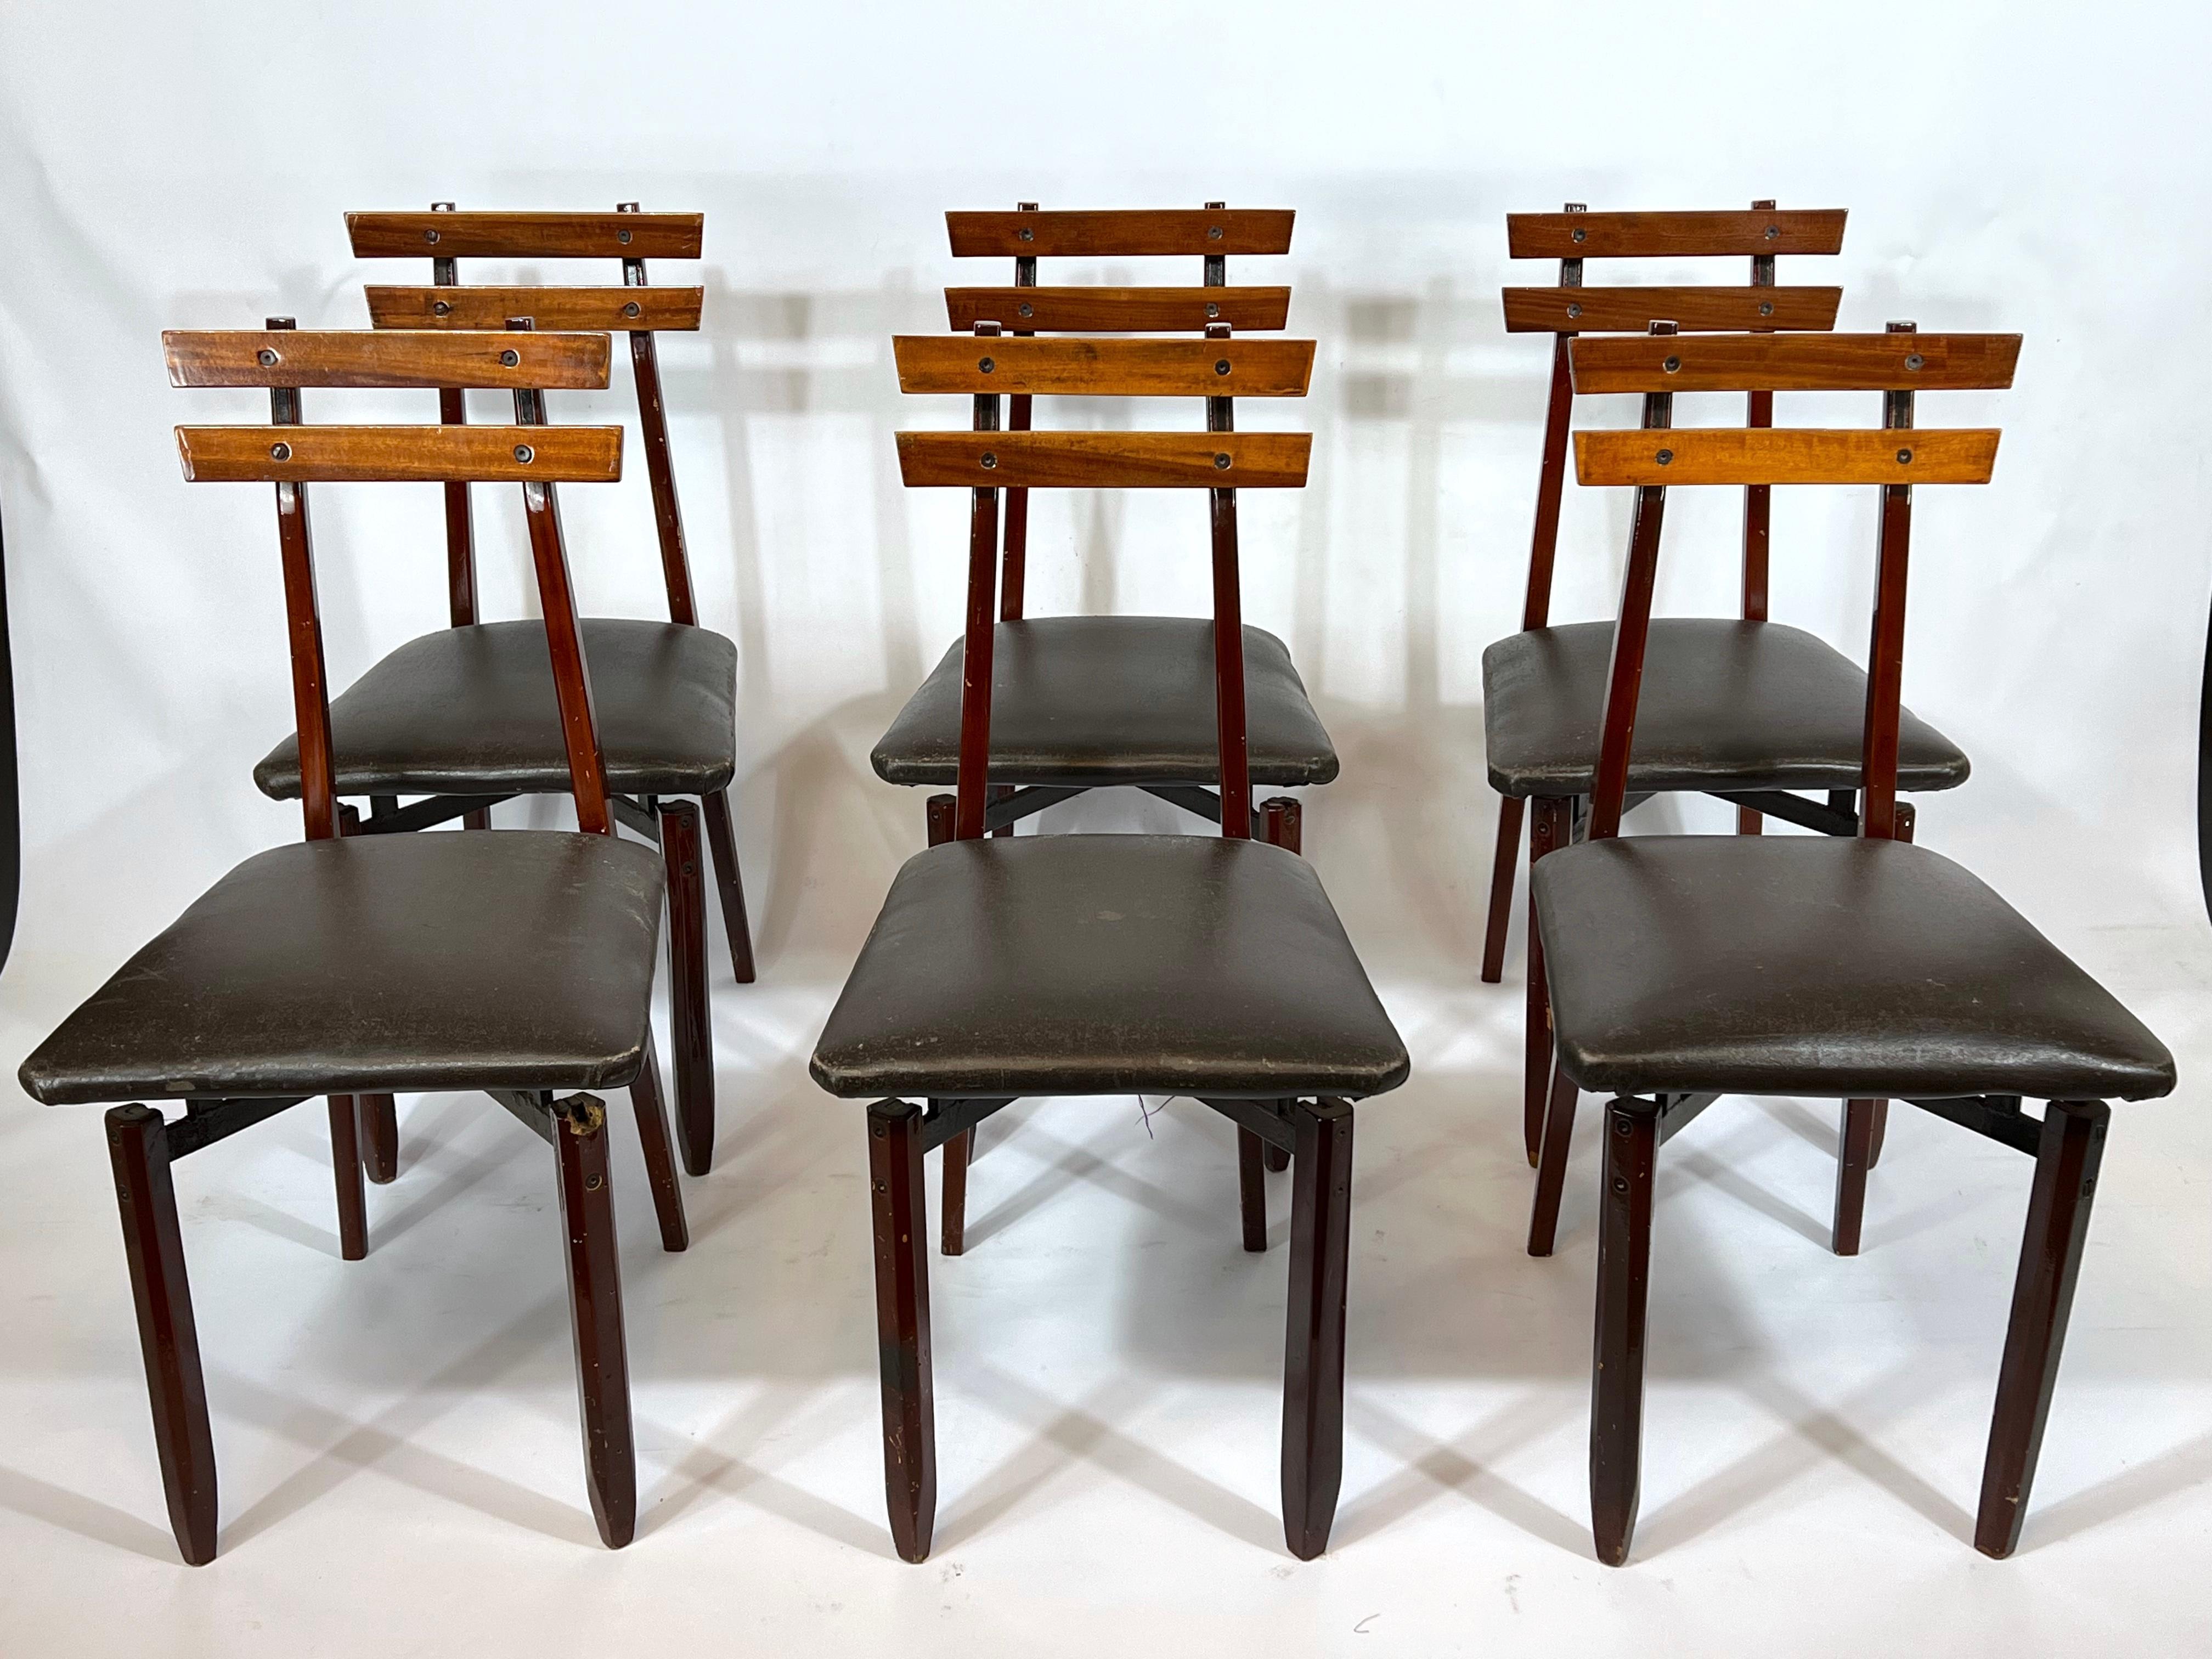 Vintage condition with evident trace of age and use for this set of six wood chairs from 50s.